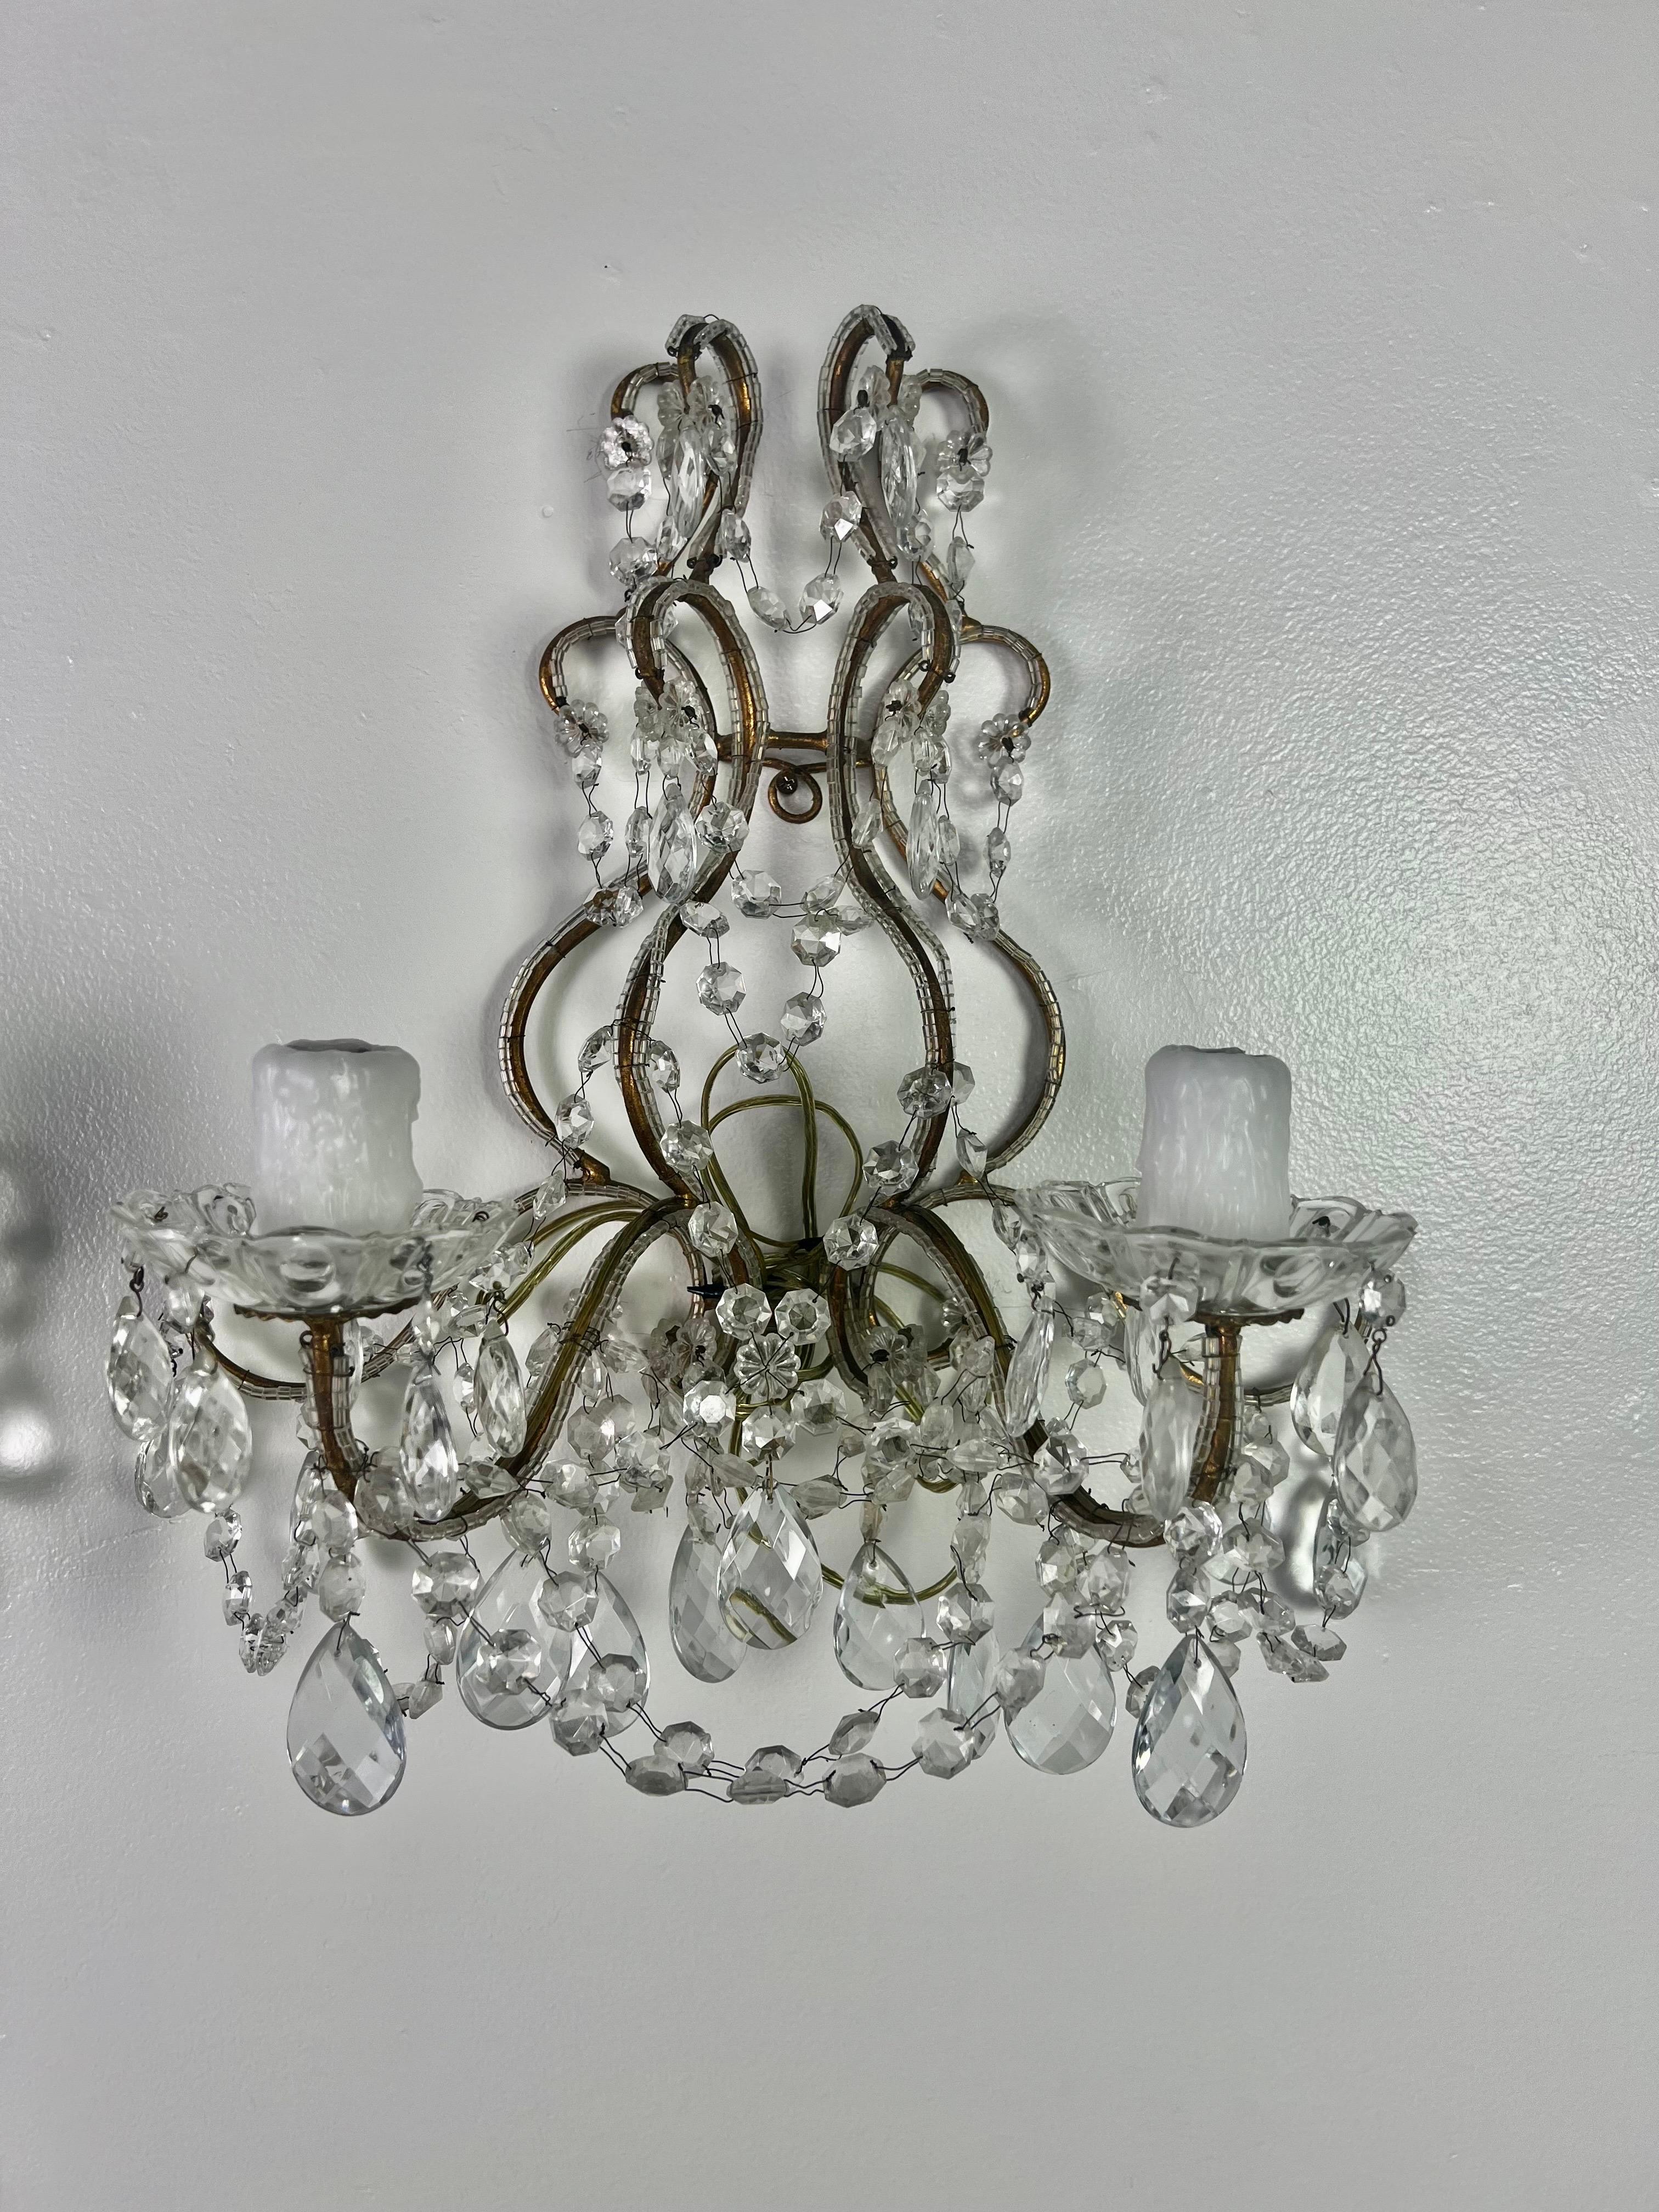 Pair of French 2-light crystal beaded sconces. The sconces are adorned with faceted almond shaped crystals and garlands of English cut beads. The sconces are newly rewired with drip wax candle covers. There are four sconces available.